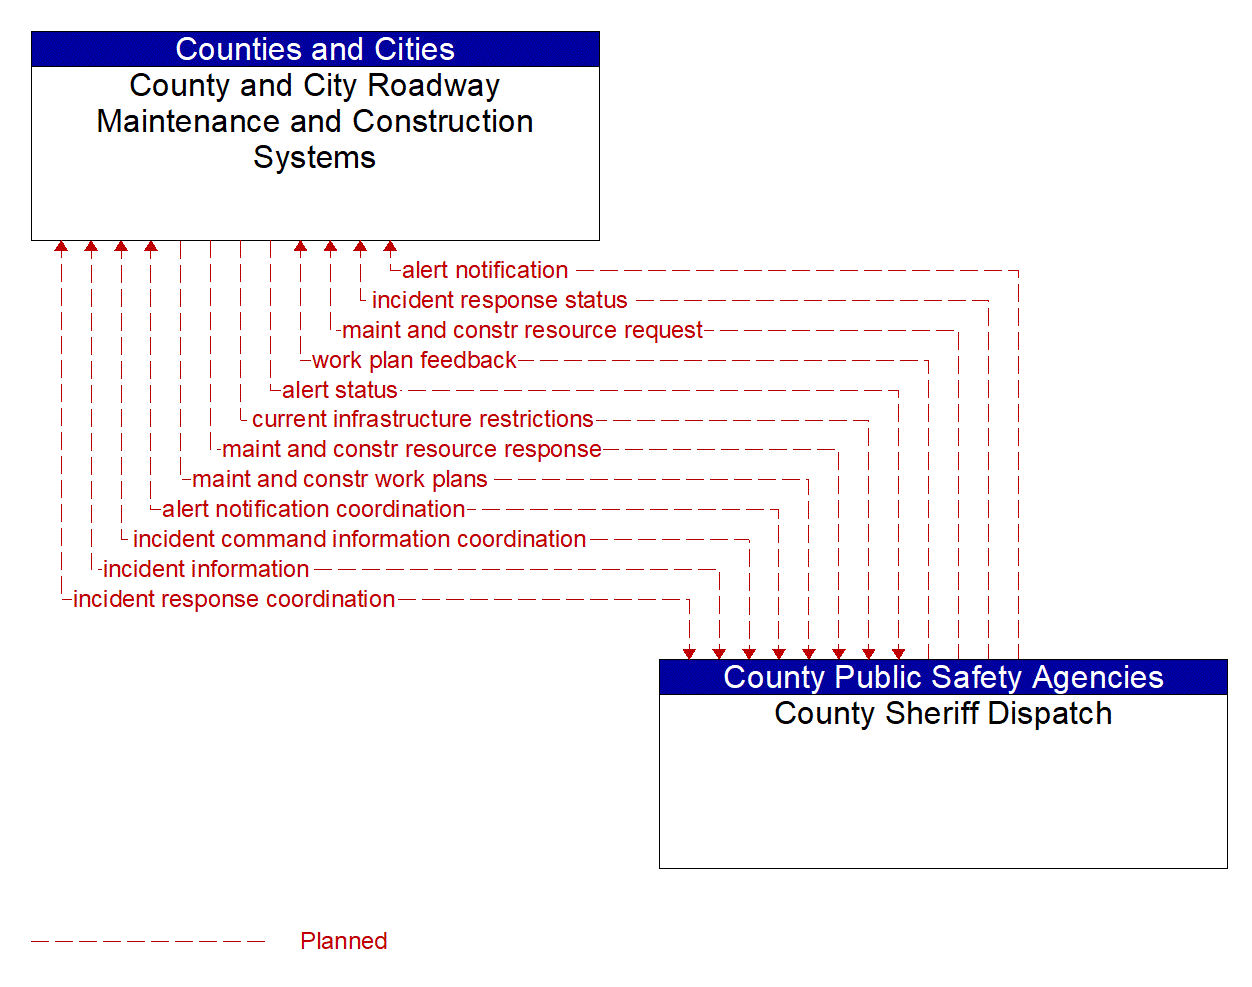 Architecture Flow Diagram: County Sheriff Dispatch <--> County and City Roadway Maintenance and Construction Systems